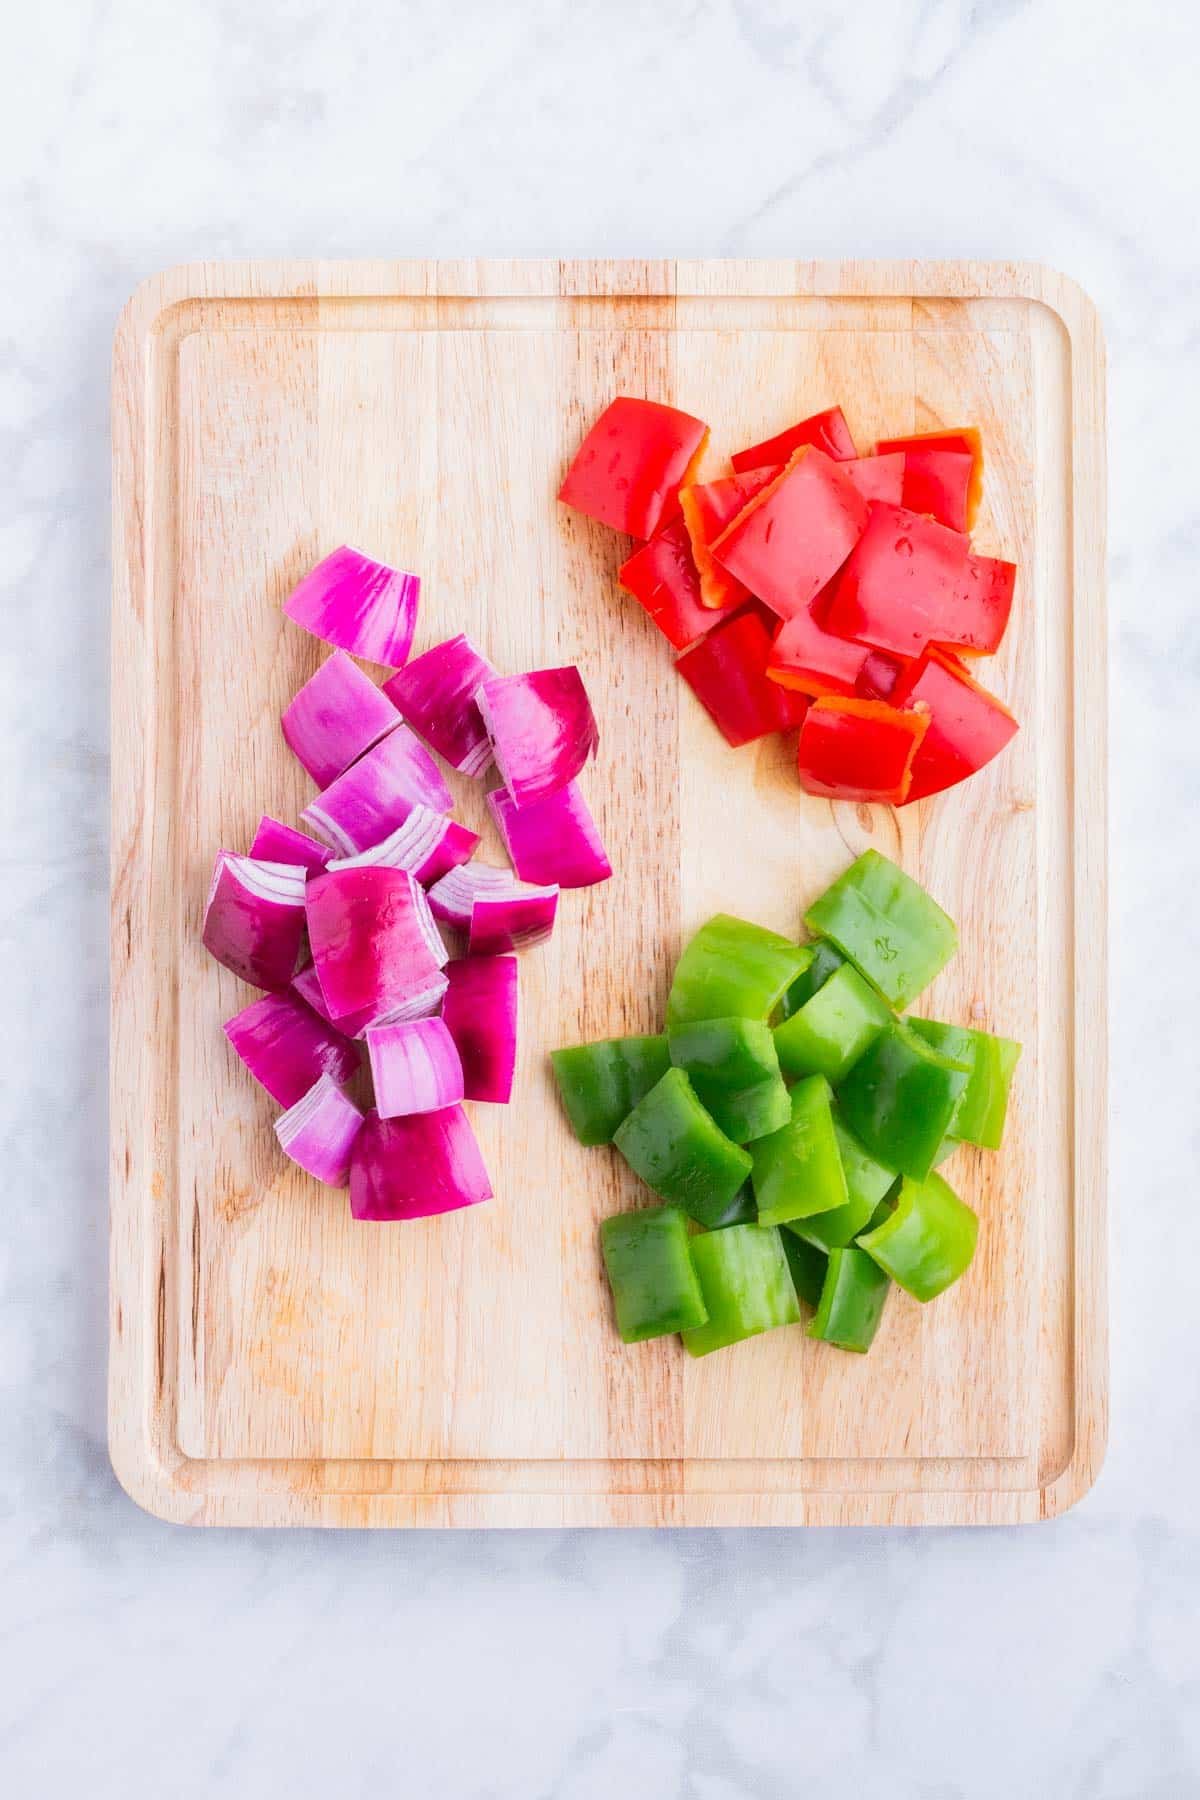 Onion and bell peppers are sliced before grilling.